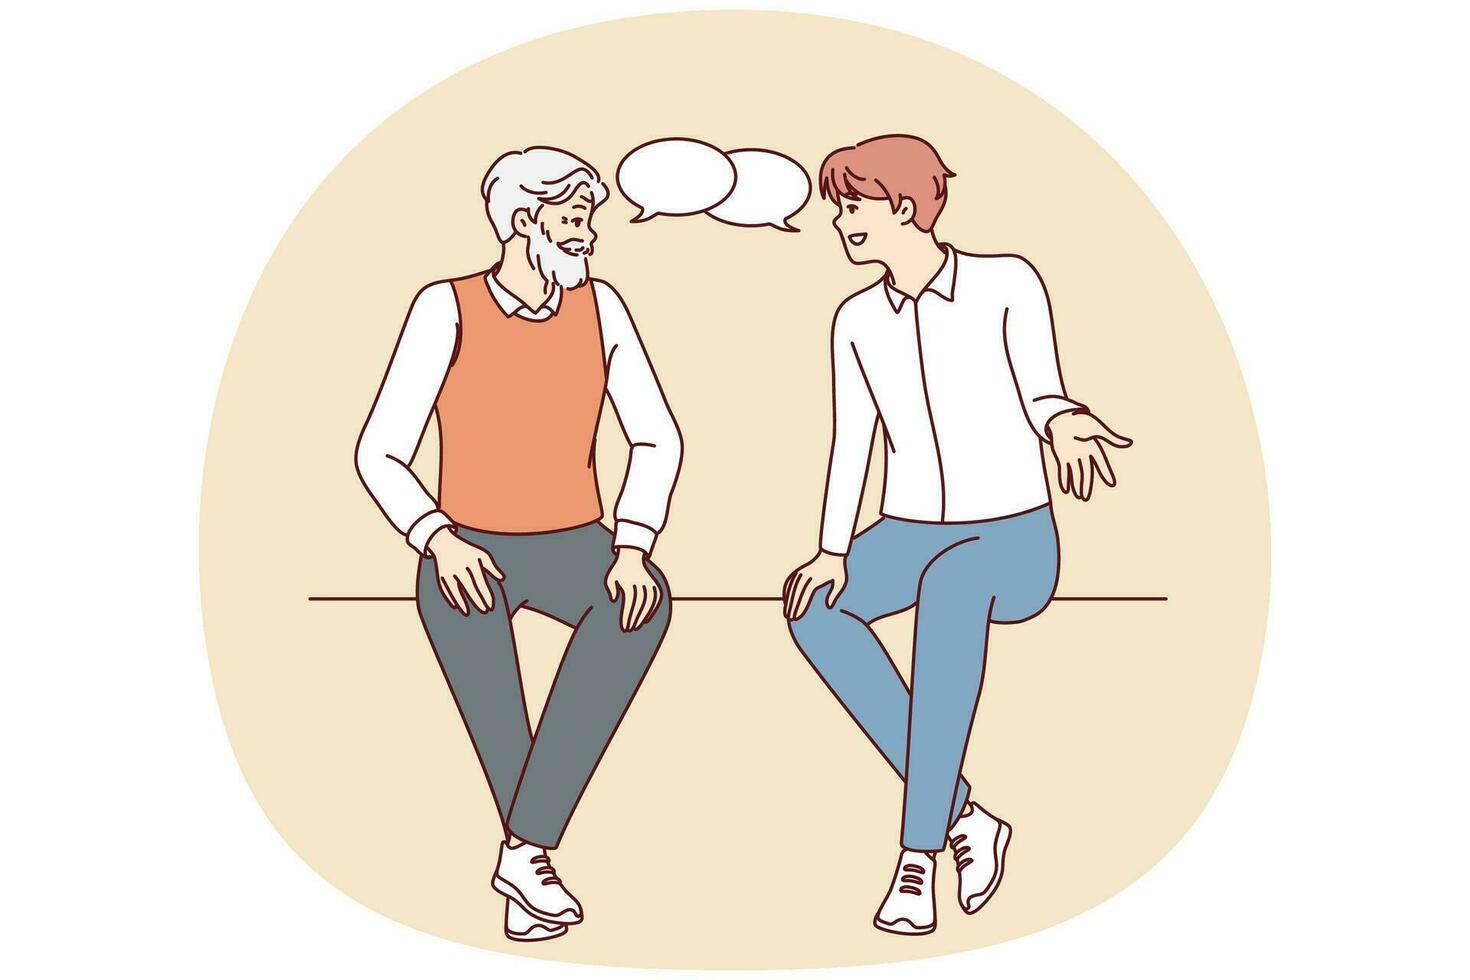 Old and young men sitting together talking. Older and younger male generation with speech bubbles engaged in conversation. Vector illustration.